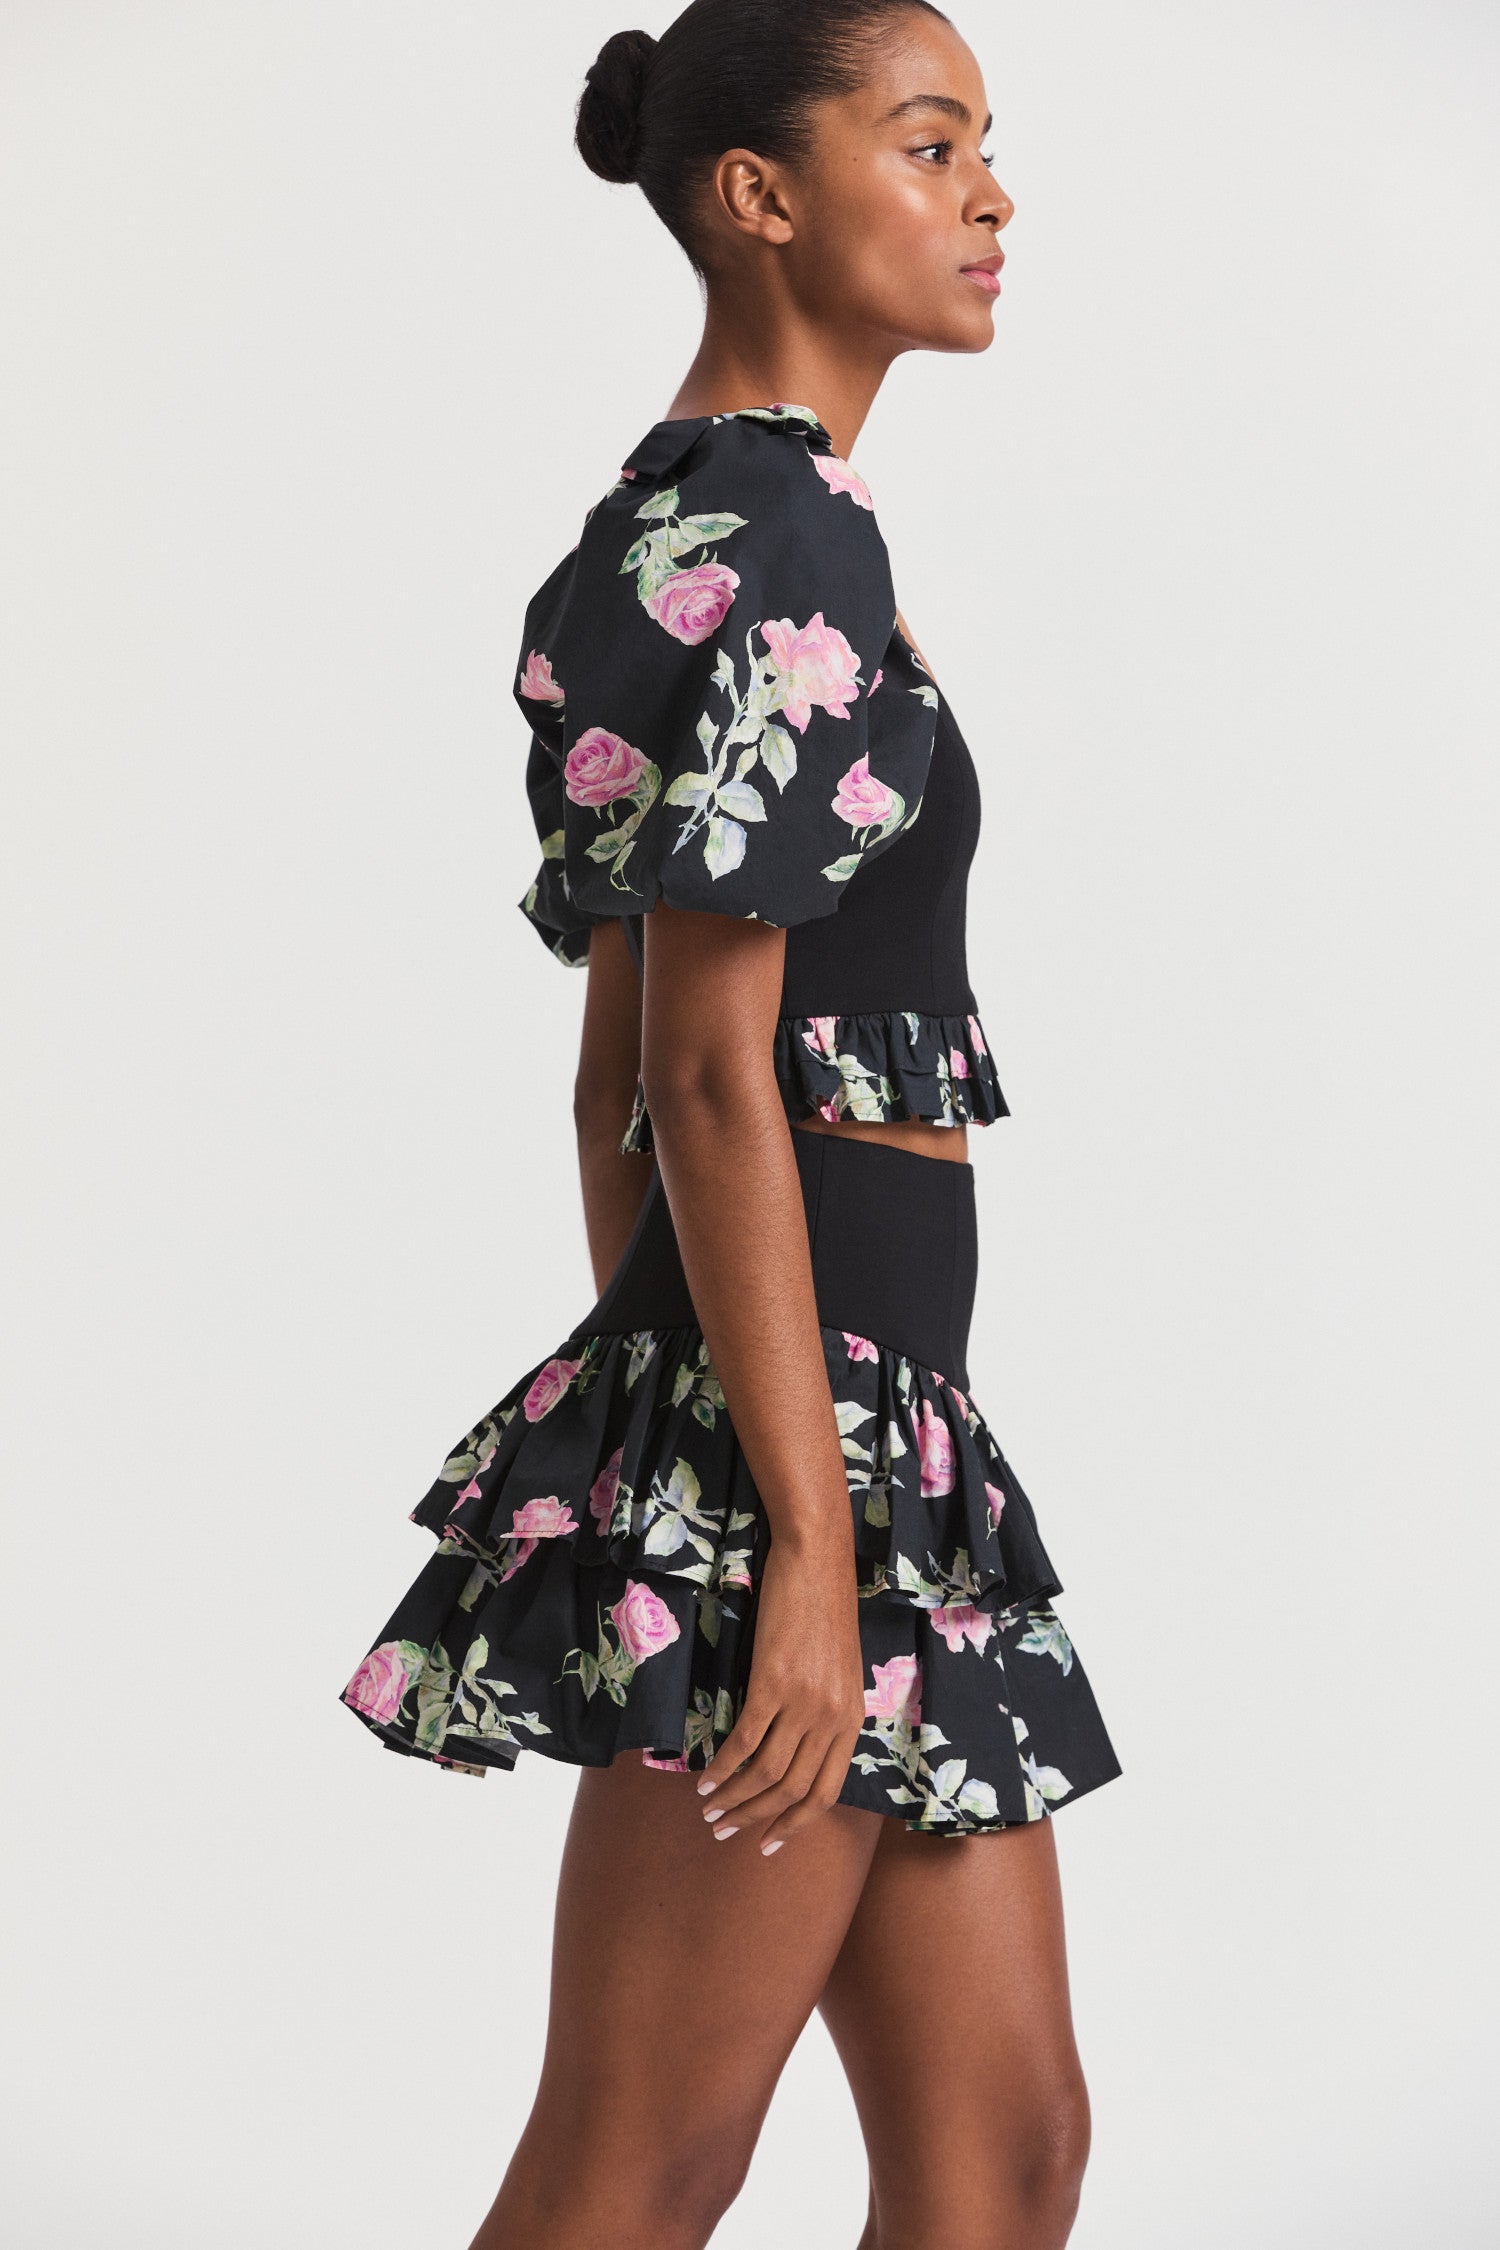 Black floral mini skirt with a hip yoke falling to a tiered ruffle skirt. 